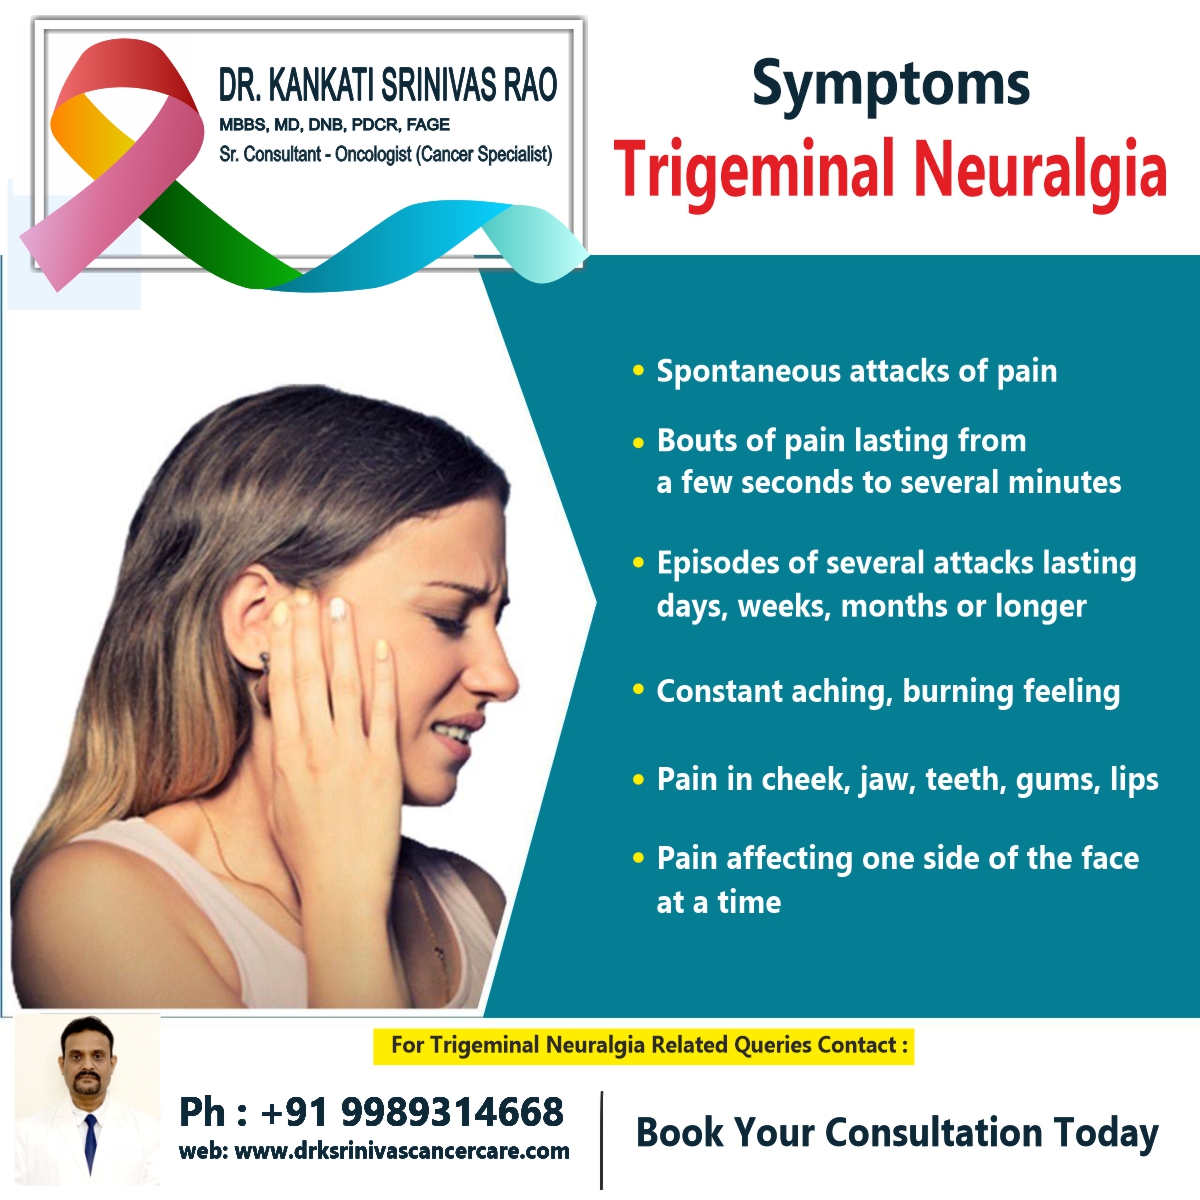 SYMPTOMS OF TRIGEMINAL NEURALGIA ✔️ Spontaneous attacks of pain ✔️ Bouts of pain lasting from a few seconds to several minutes ✔️ Episodes of several attacks lasting days, weeks, months, or longer ✔️ Constant aching, burning feeling #symptoms #trigeminalneuralgia #pain